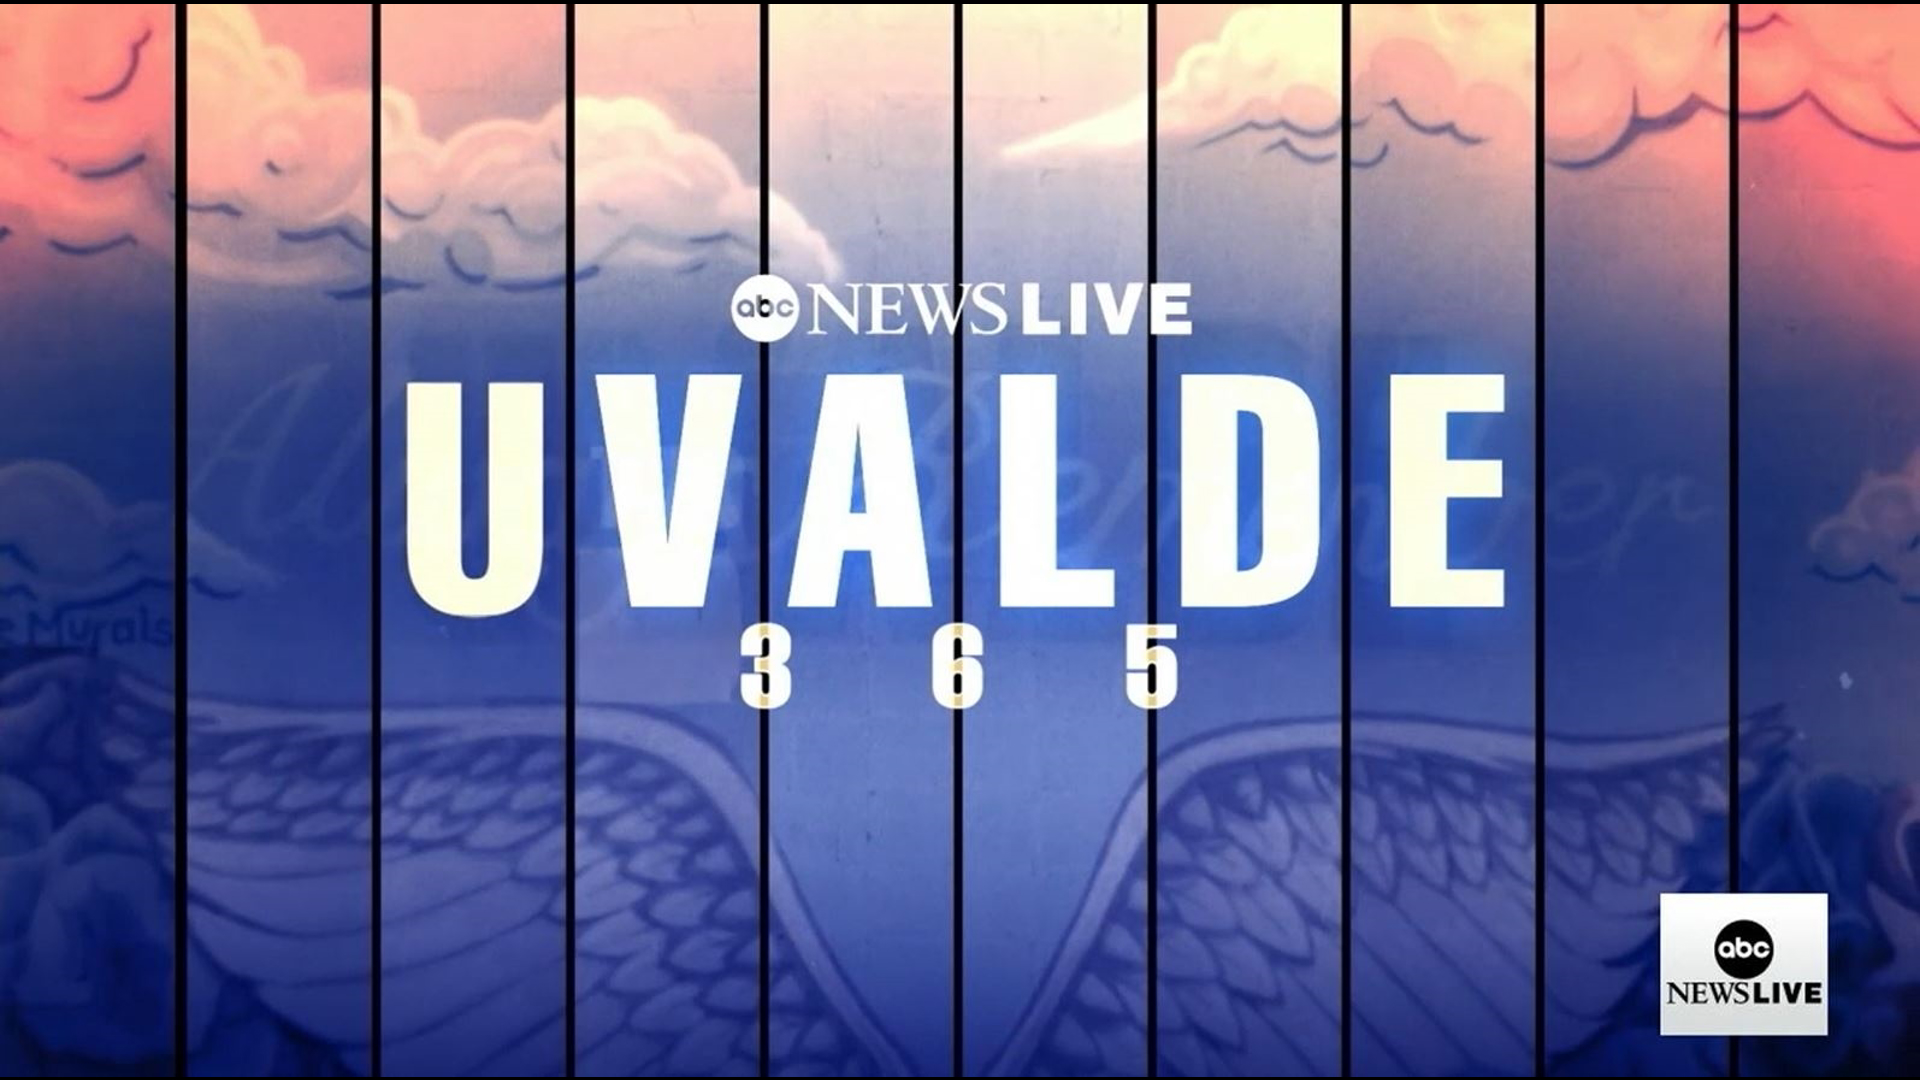 ABC News looks into ways the people of Uvalde are navigating their lives nearly 6 months after the Robb Elementary deadly mass shooting.